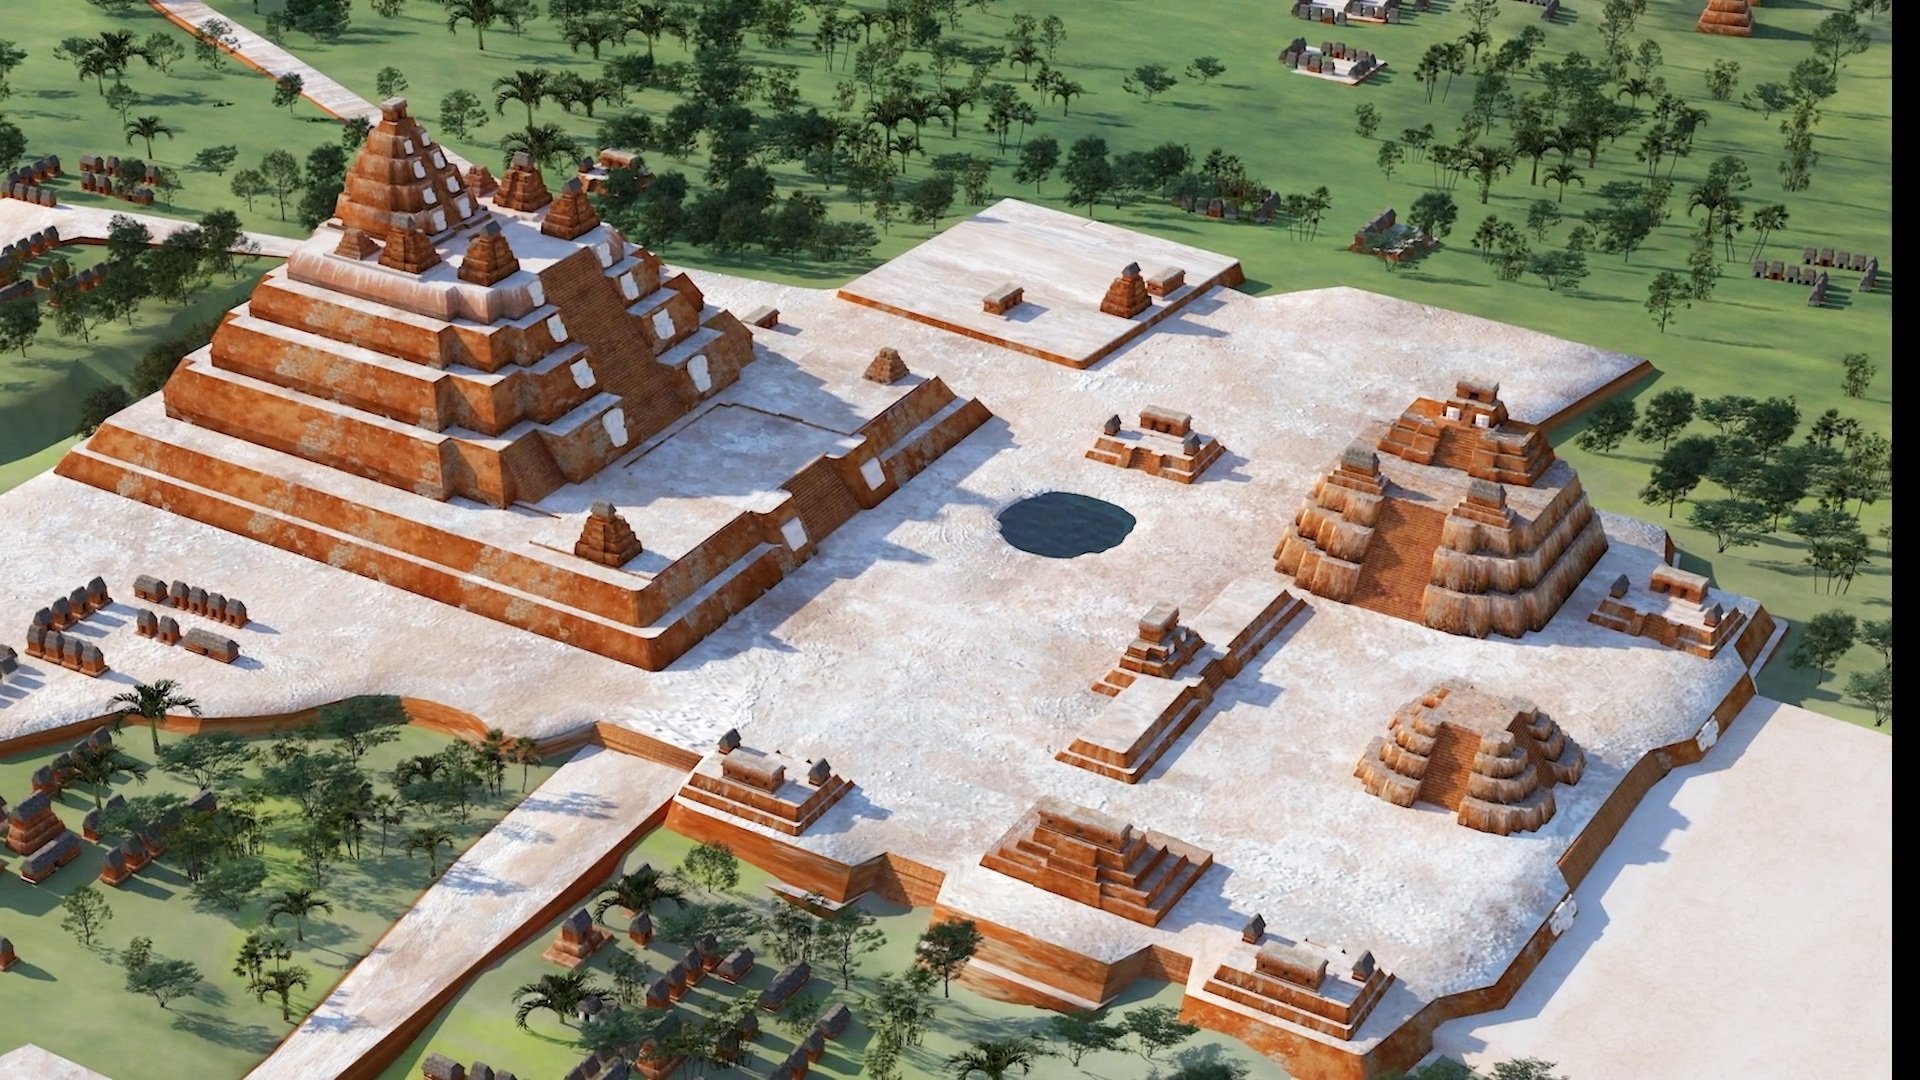 Google Releases Online Video Game About Ancient Mesoamerica